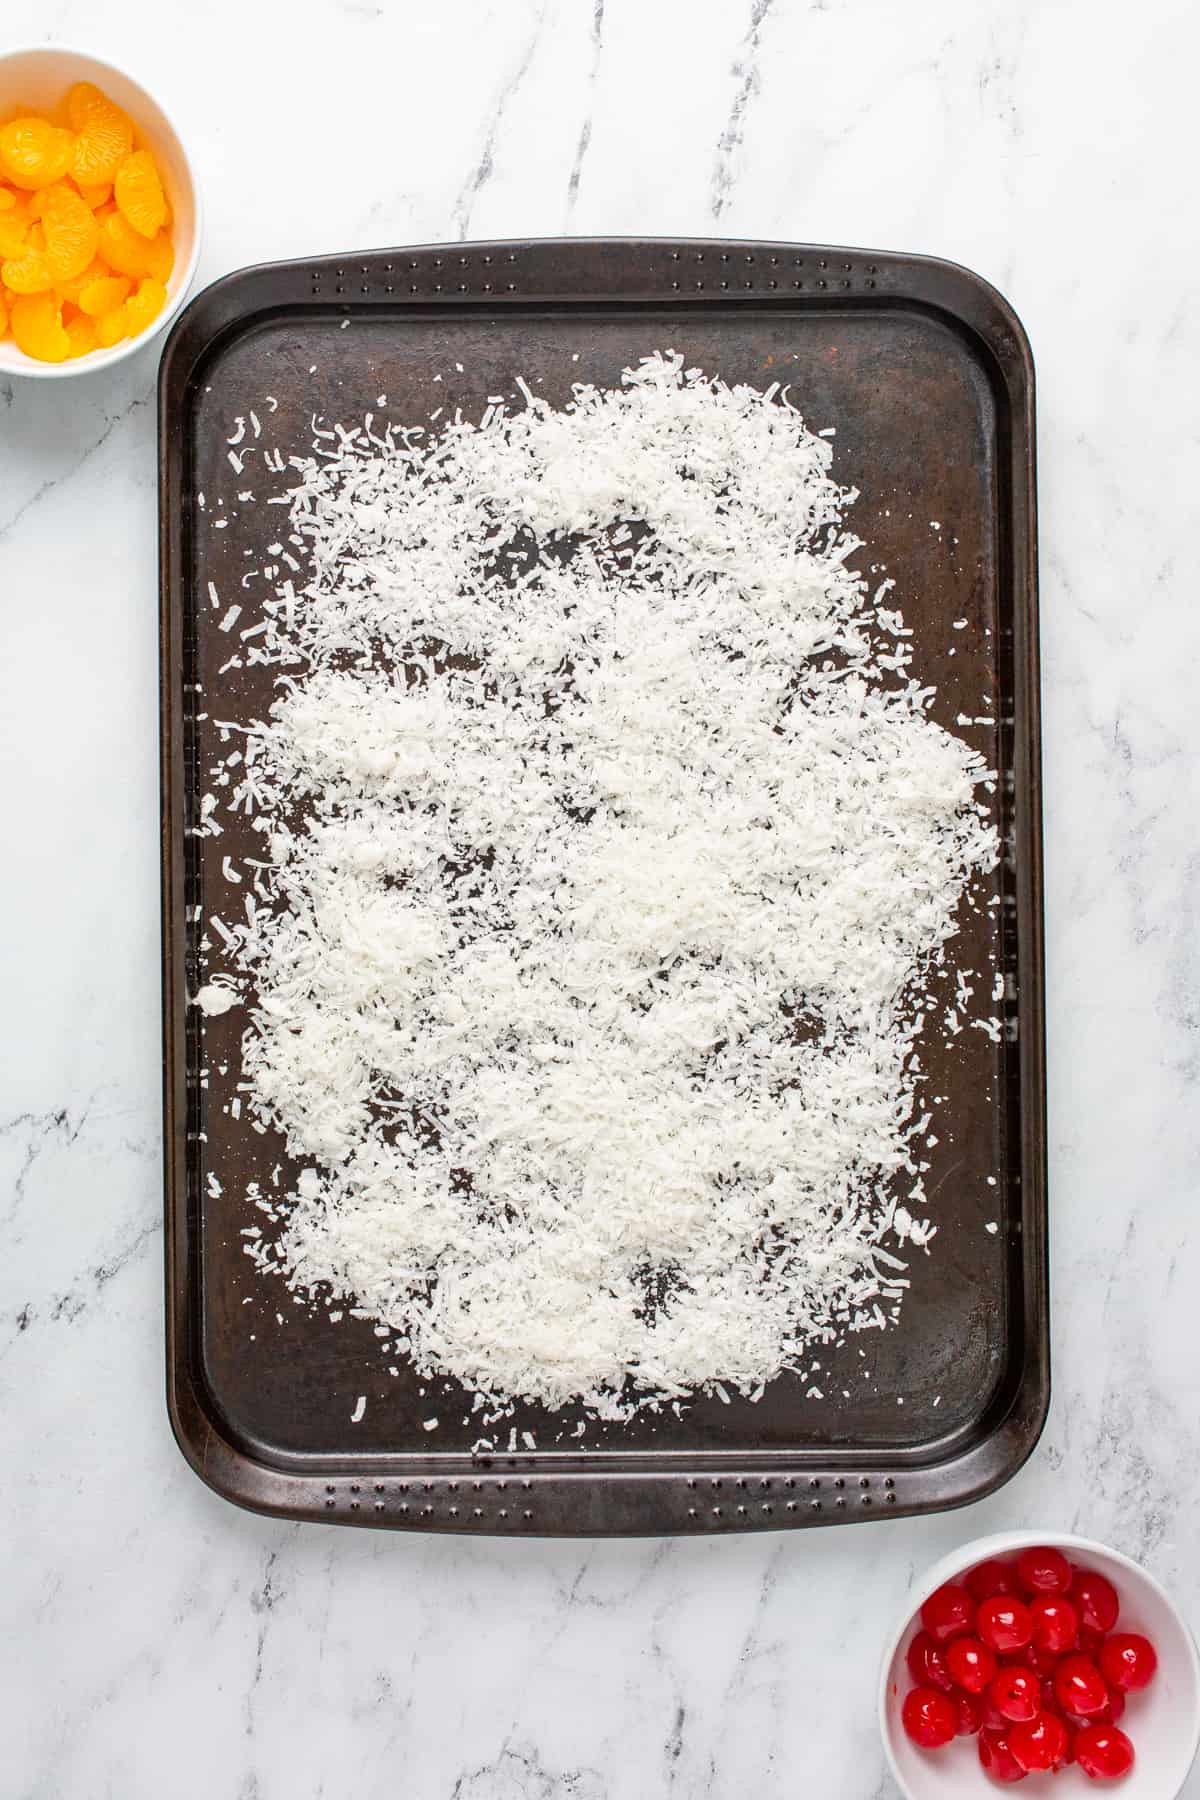 Pina Colada Fruit Dip - shredded coconut on a sheet pan prior to baking